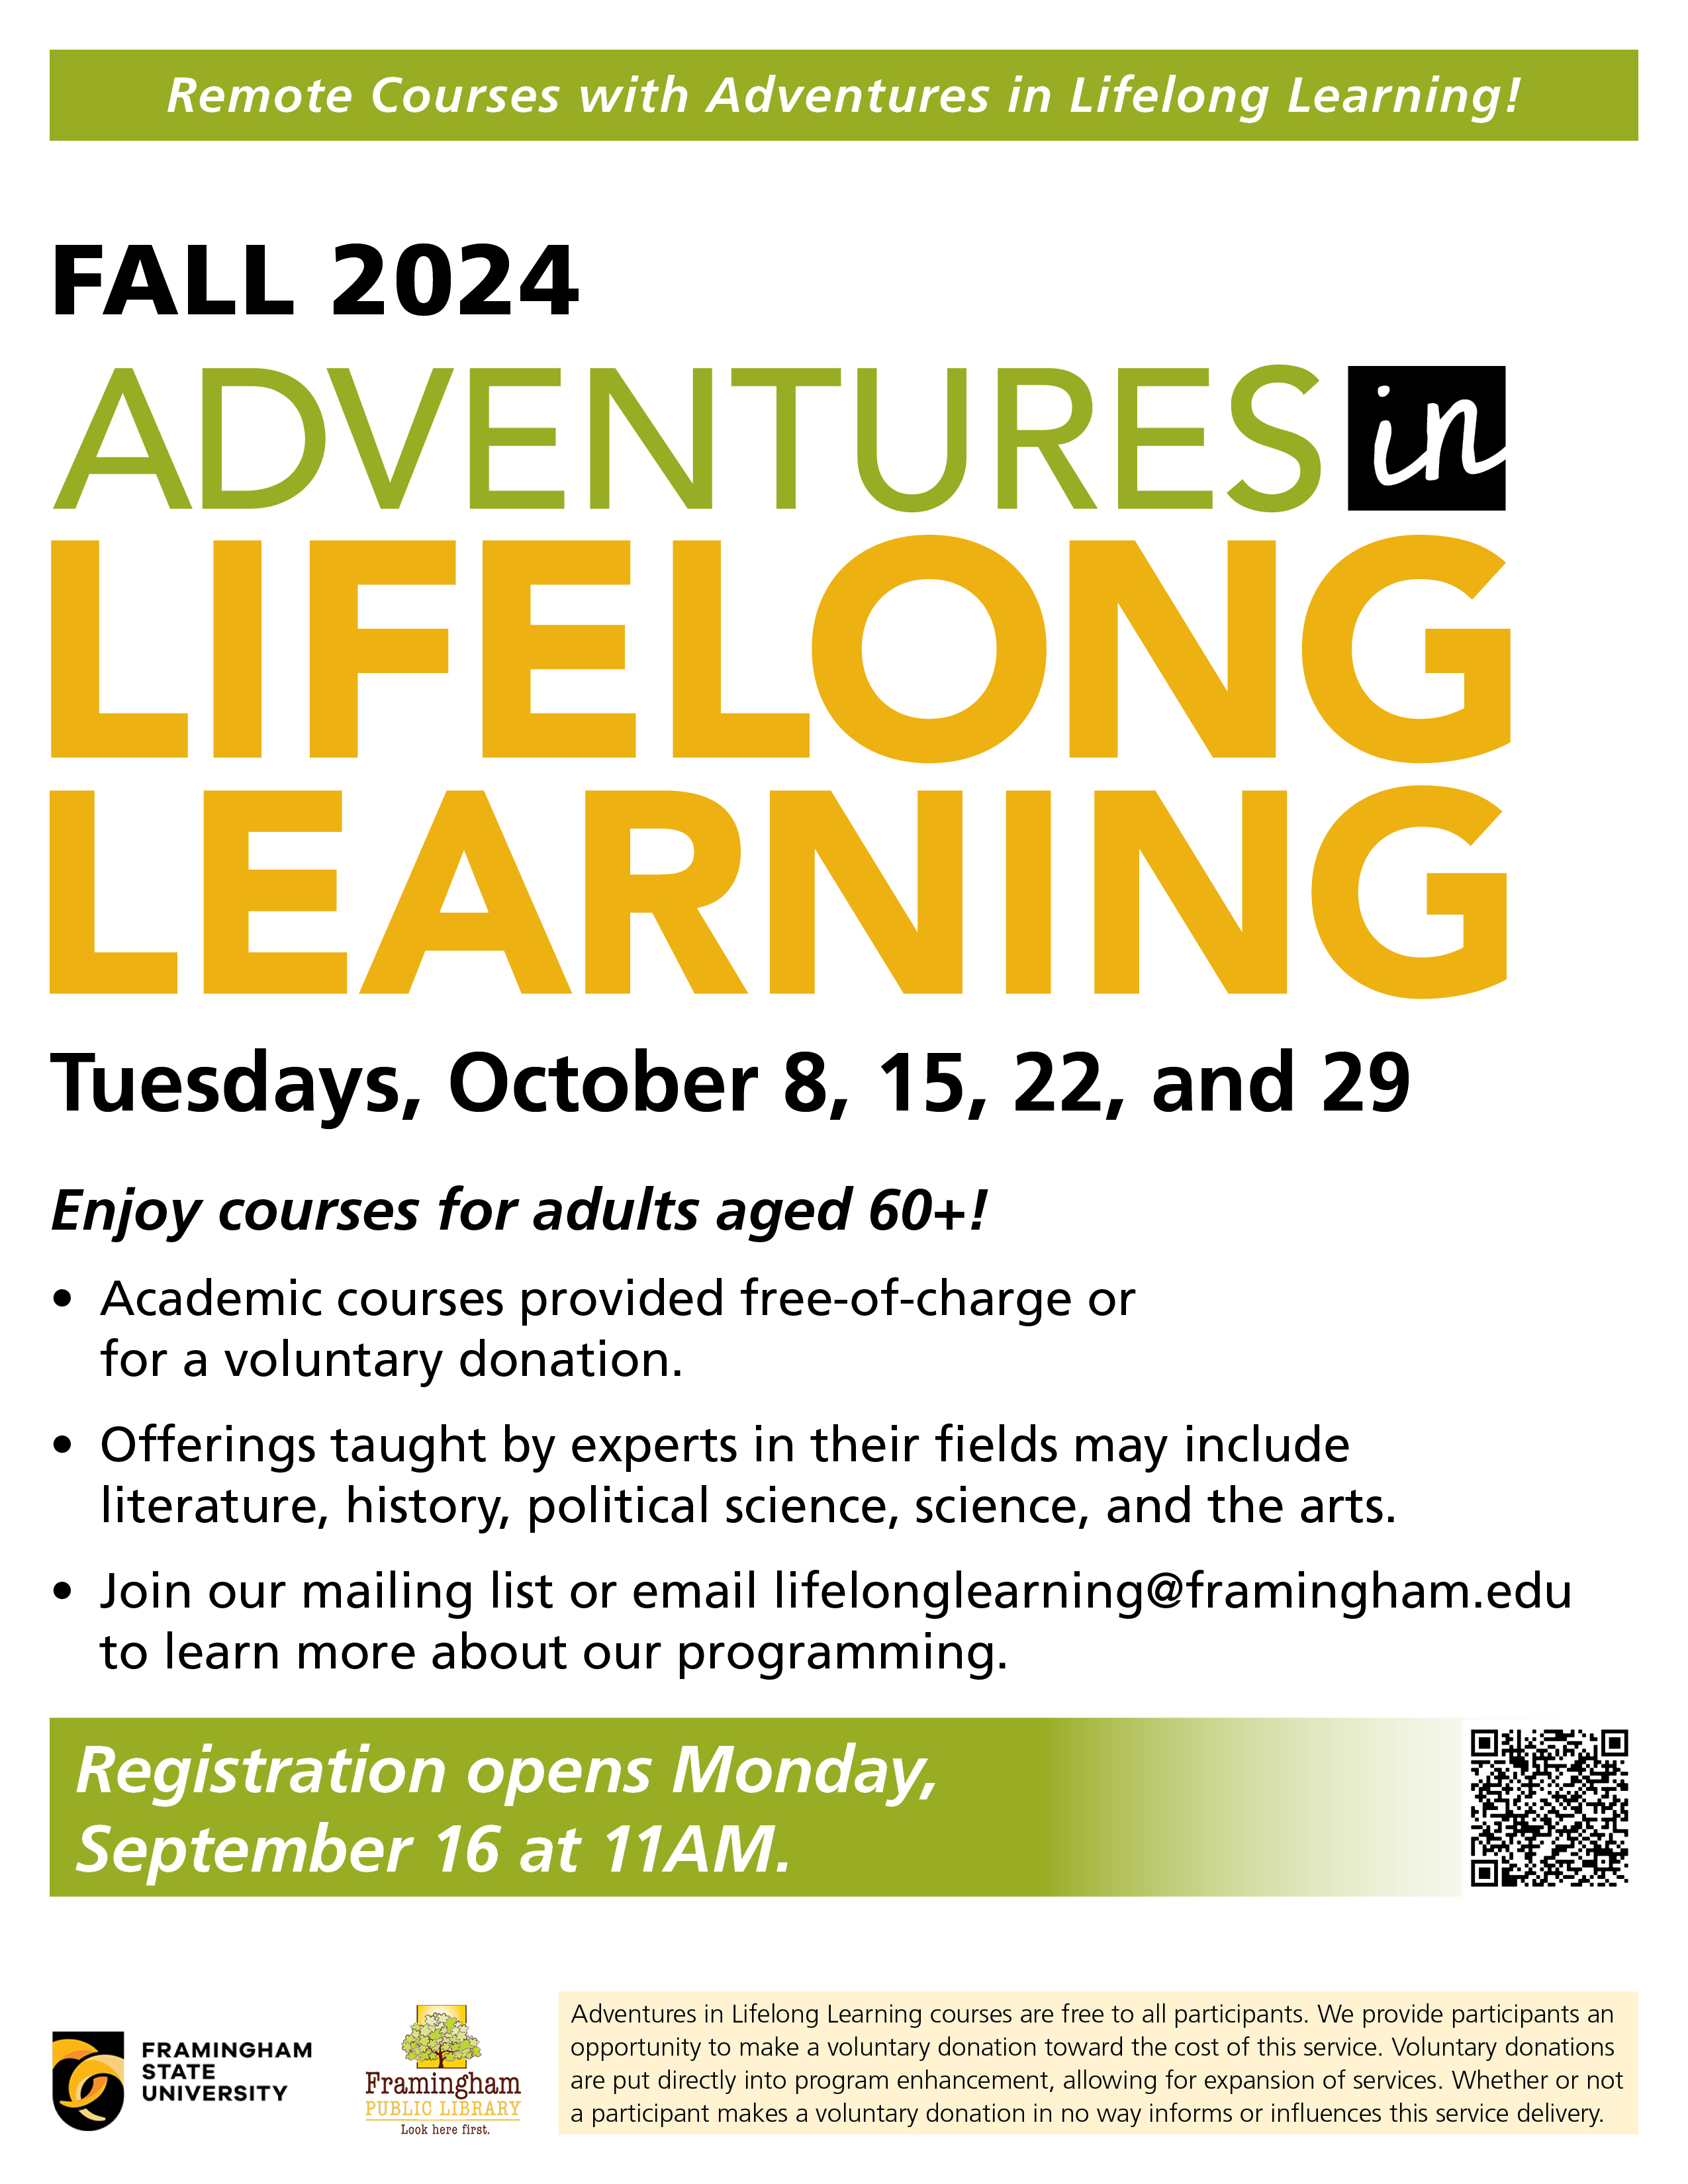 Fall 2024. Adventures in Lifelong Learning.